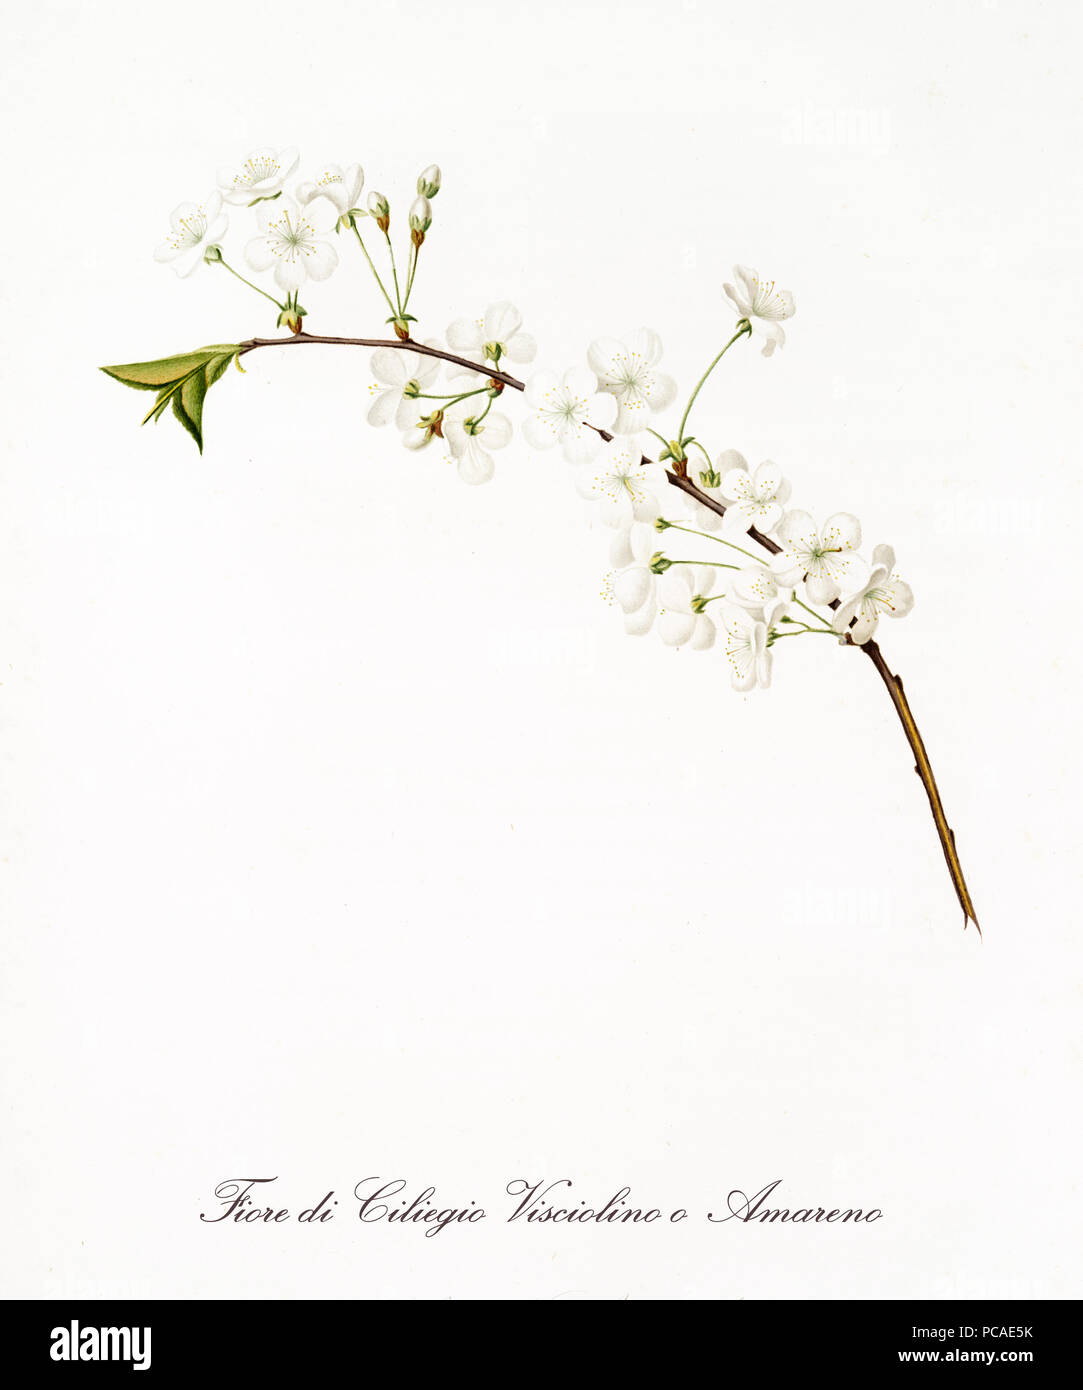 single cherry blossom branch with white flowers. Single isolated element over white background. Old detailed botanical illustration by Giorgio Gallesio published in 1817, 1839 Stock Photo